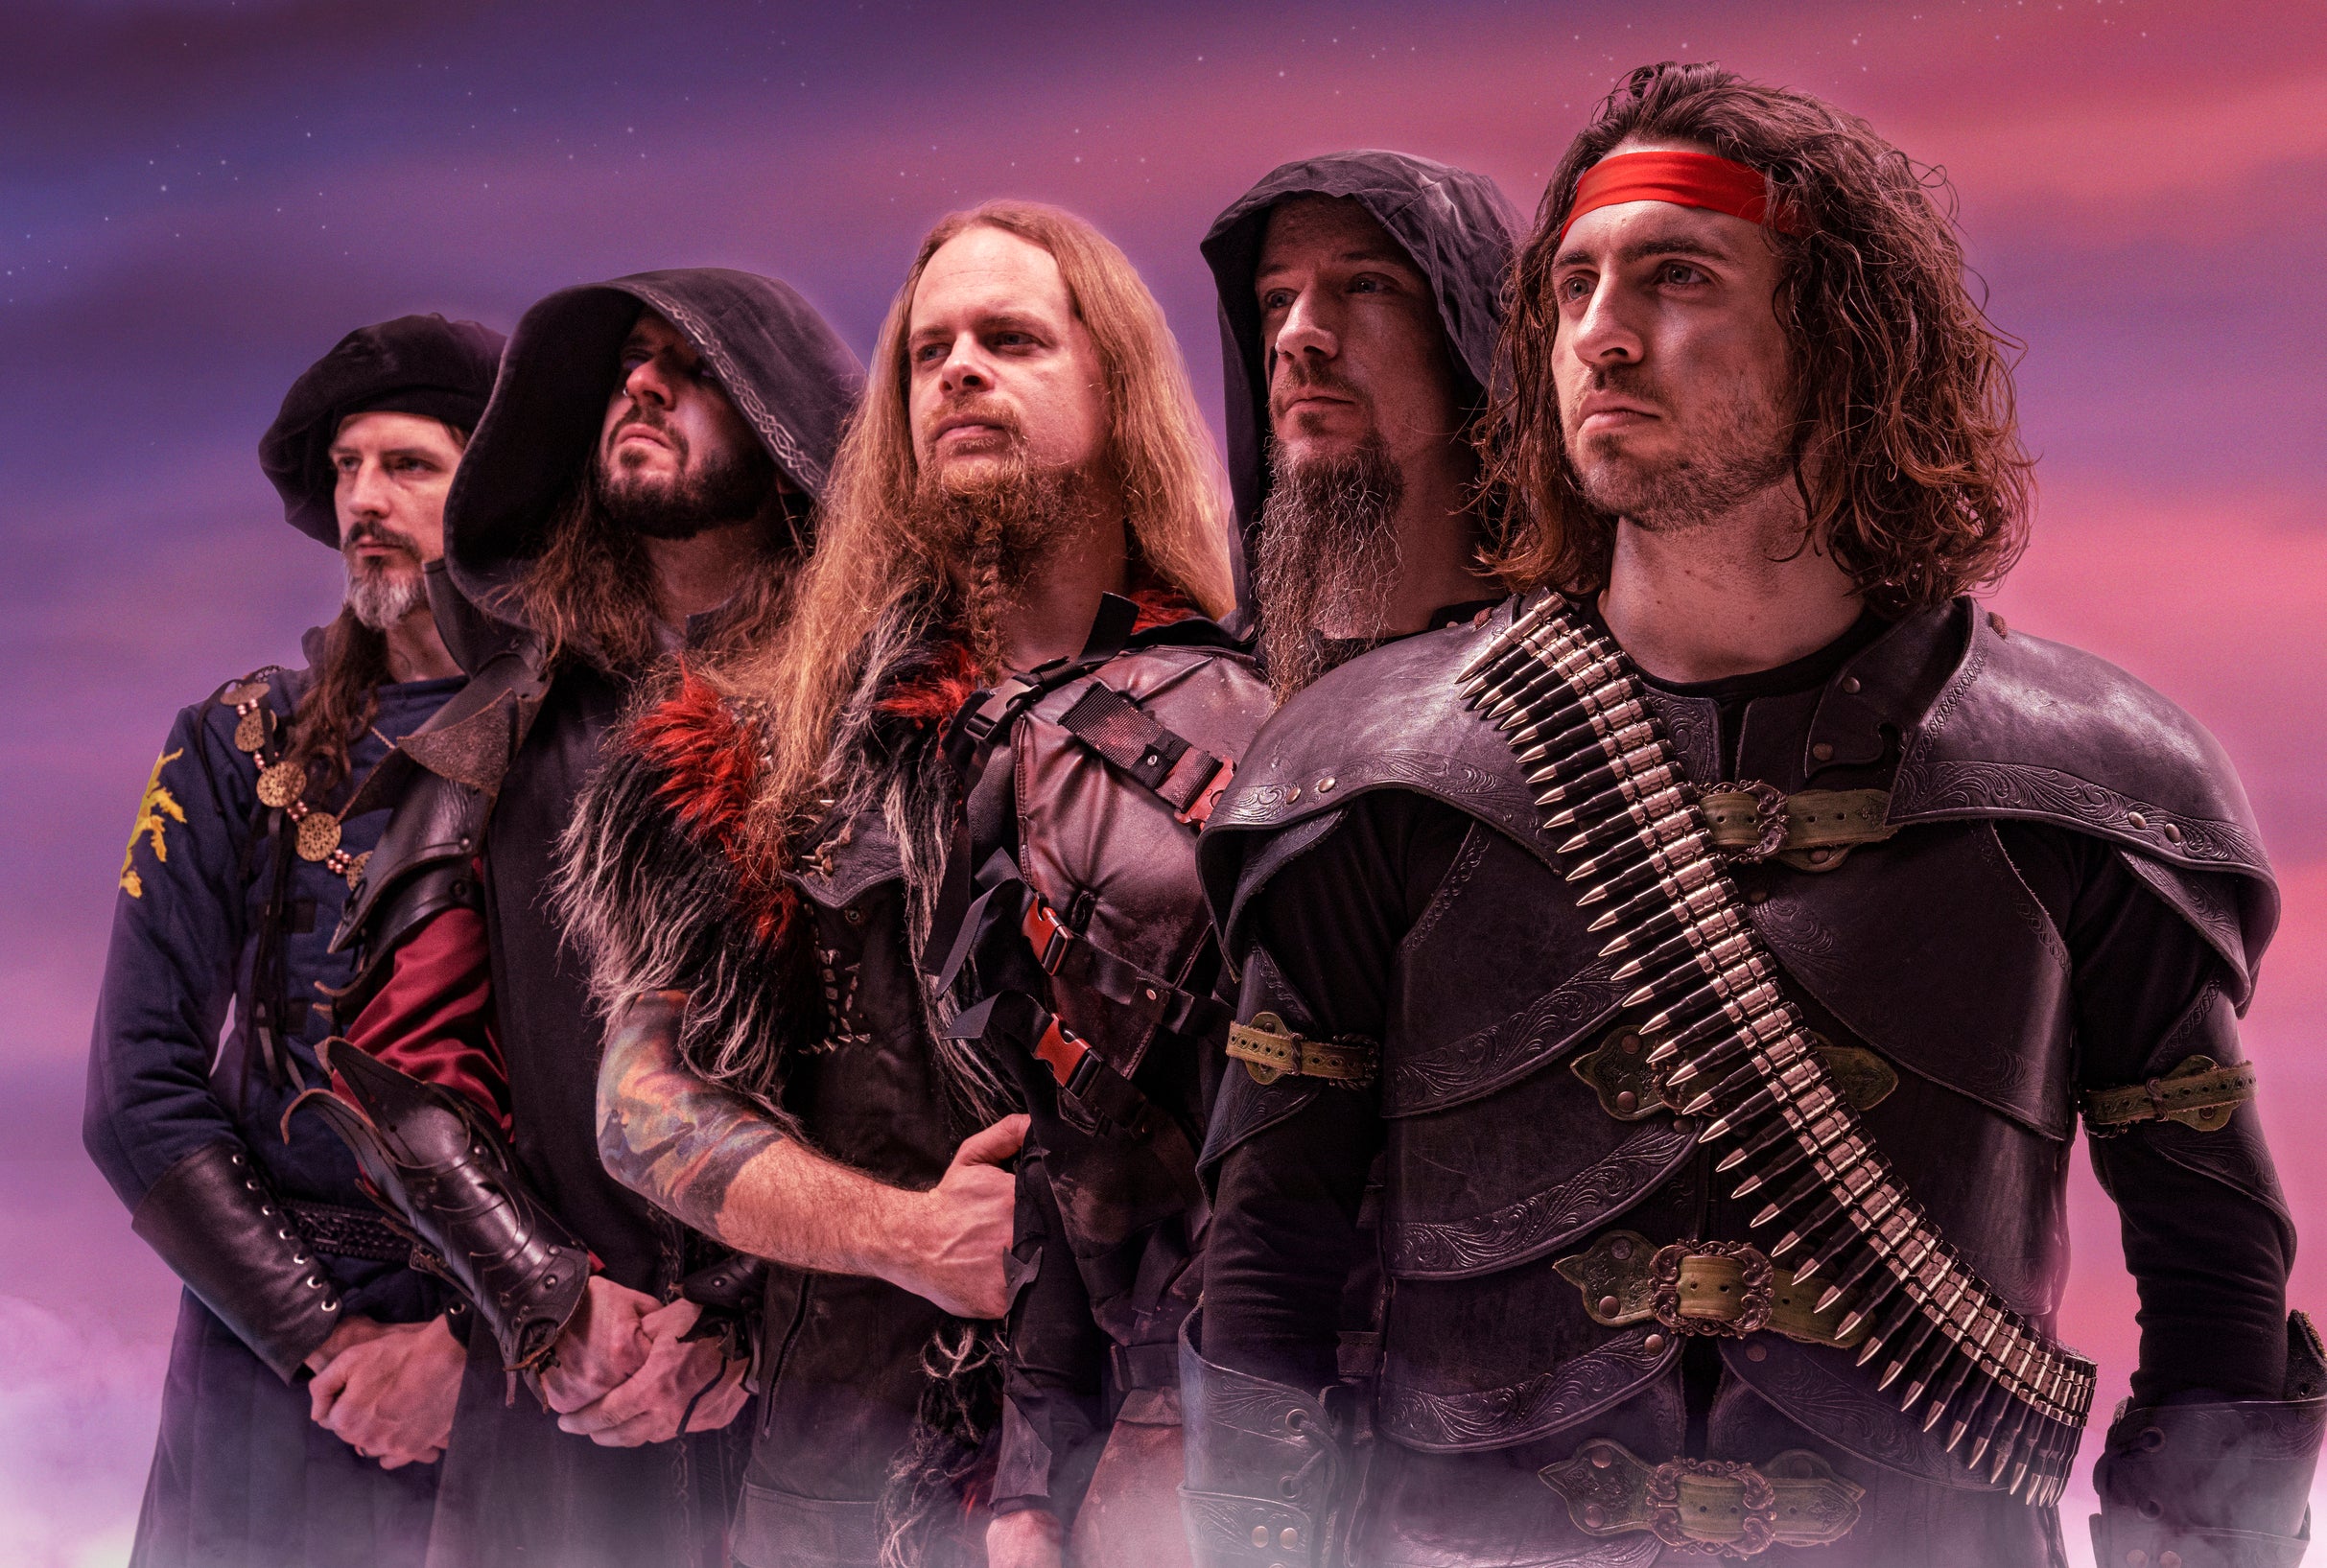 Main image for event titled Gloryhammer With Special Guest: Twilight Force